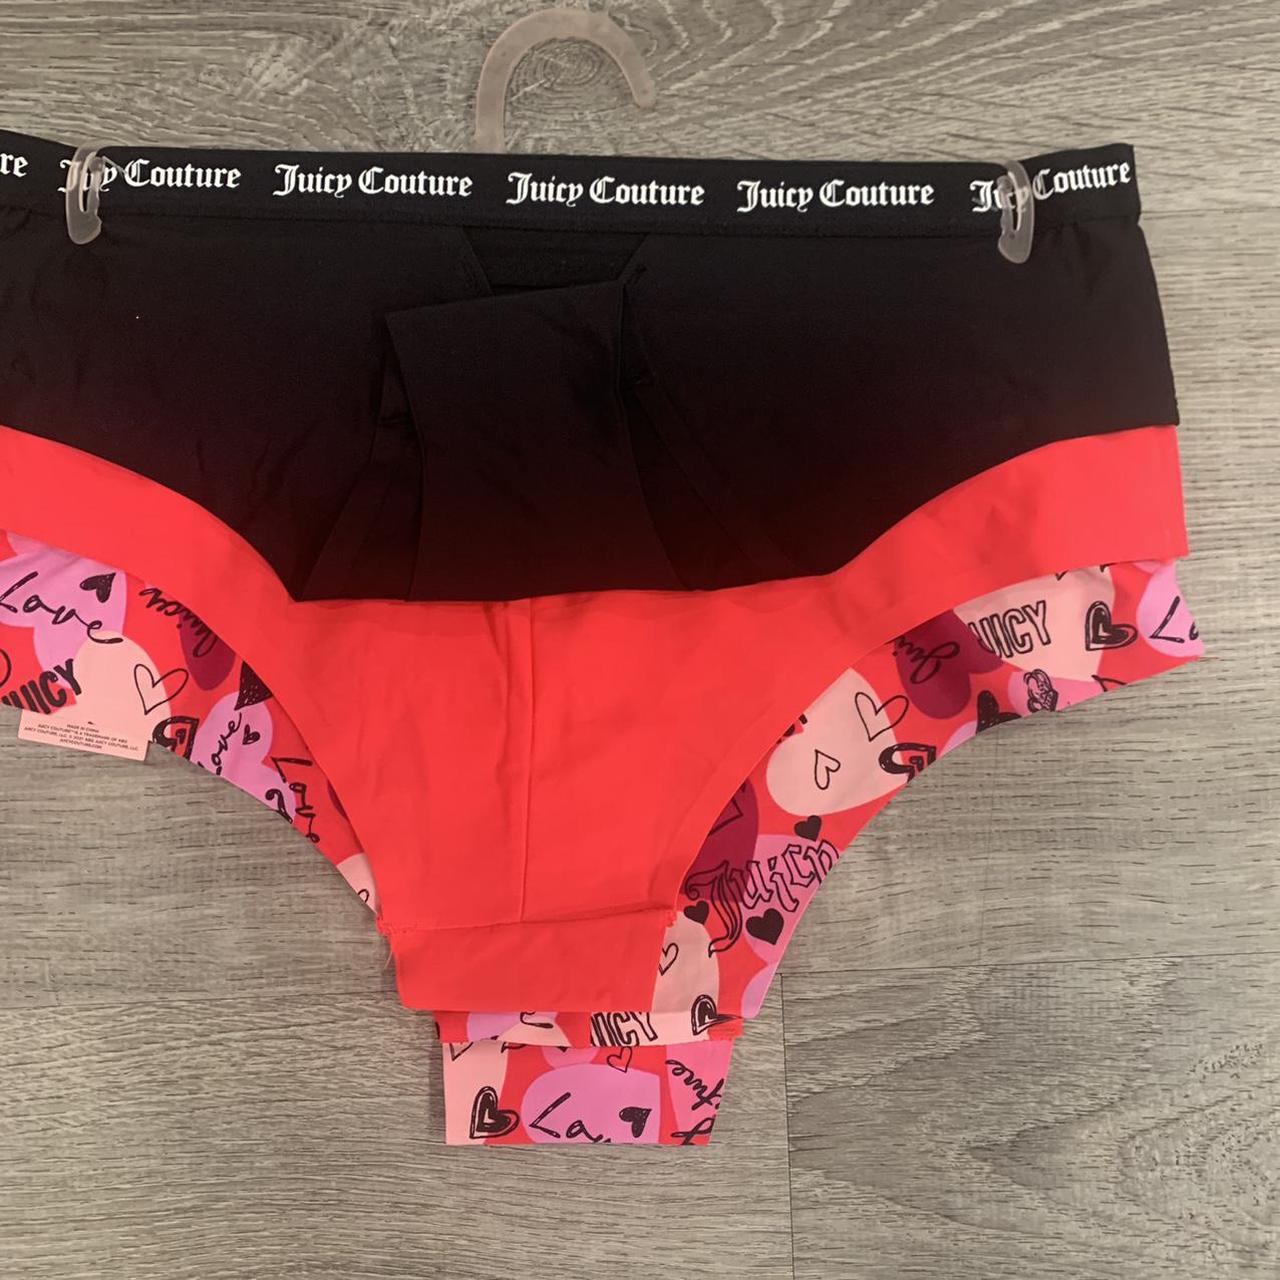 Juicy Couture Intimates No Panty Lines 3 Pack Kuwait